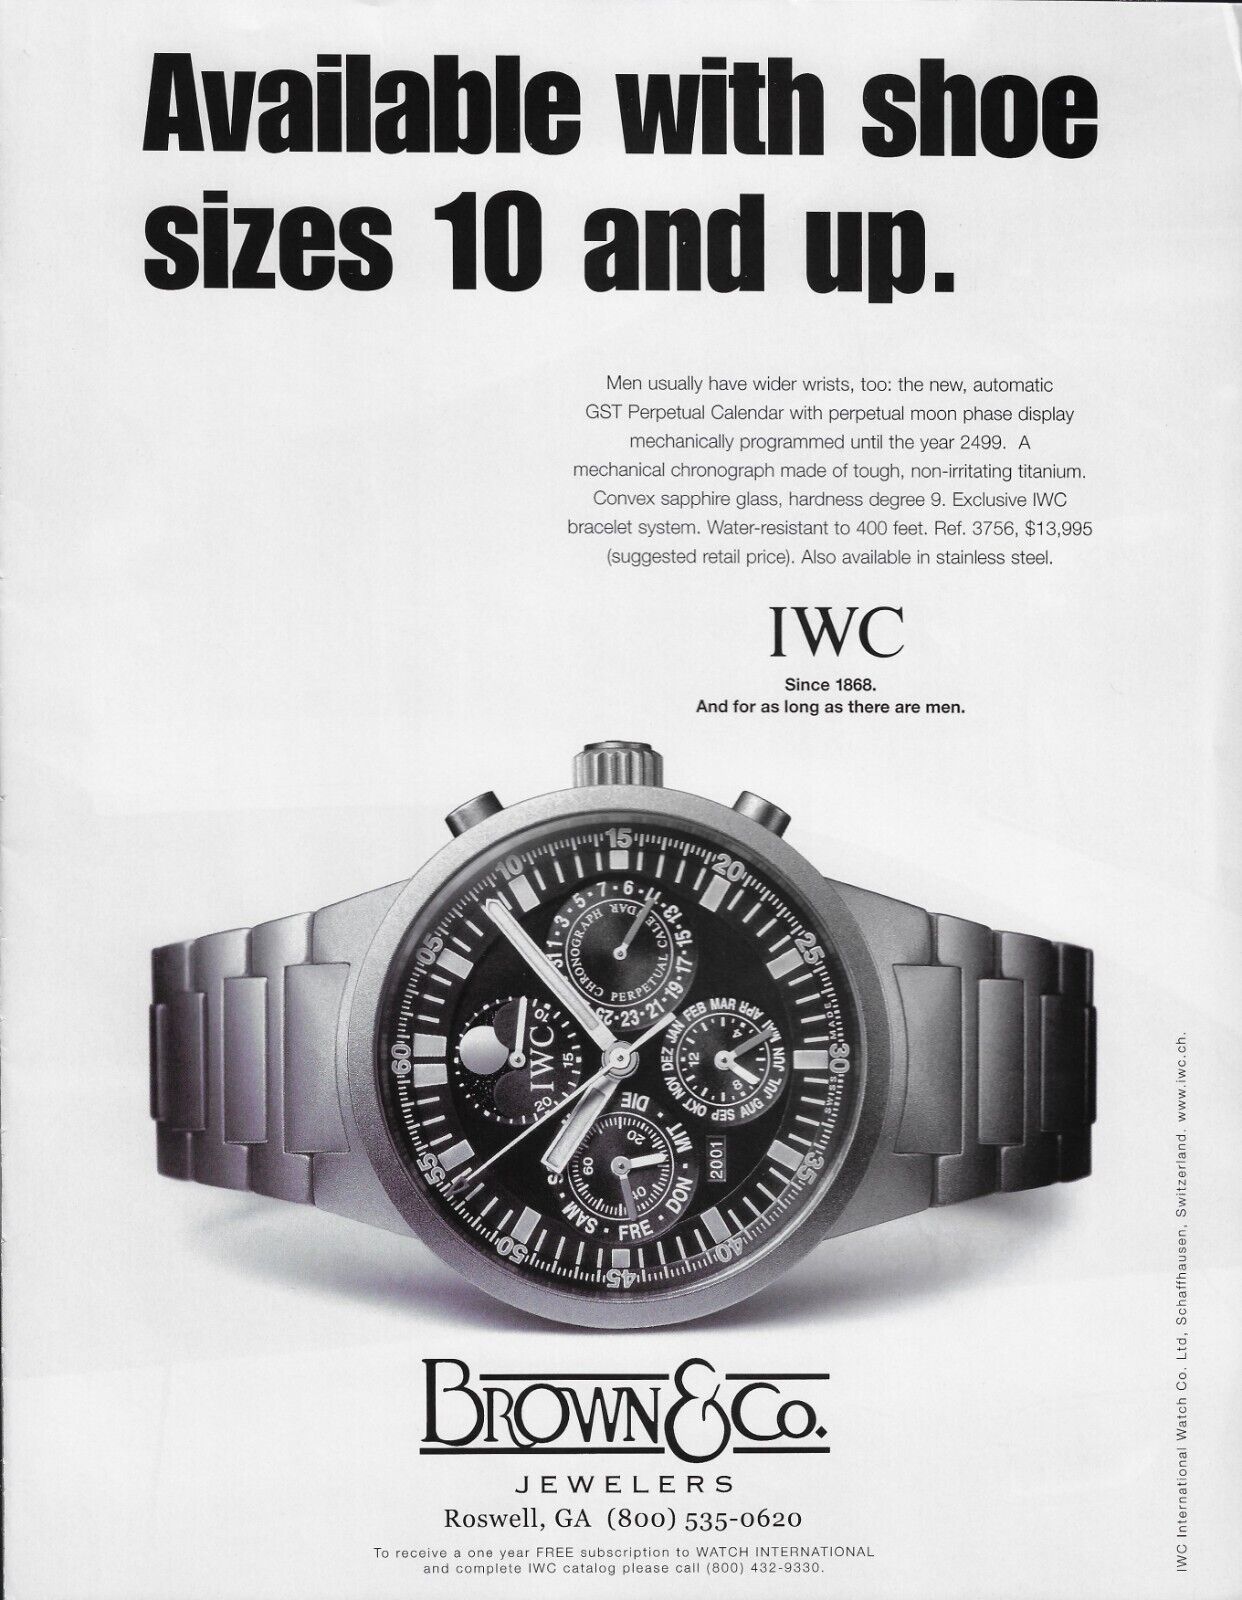 2001 IWC International Watch Co Available Shoe Size 10 and Up Vintage Print Ad x